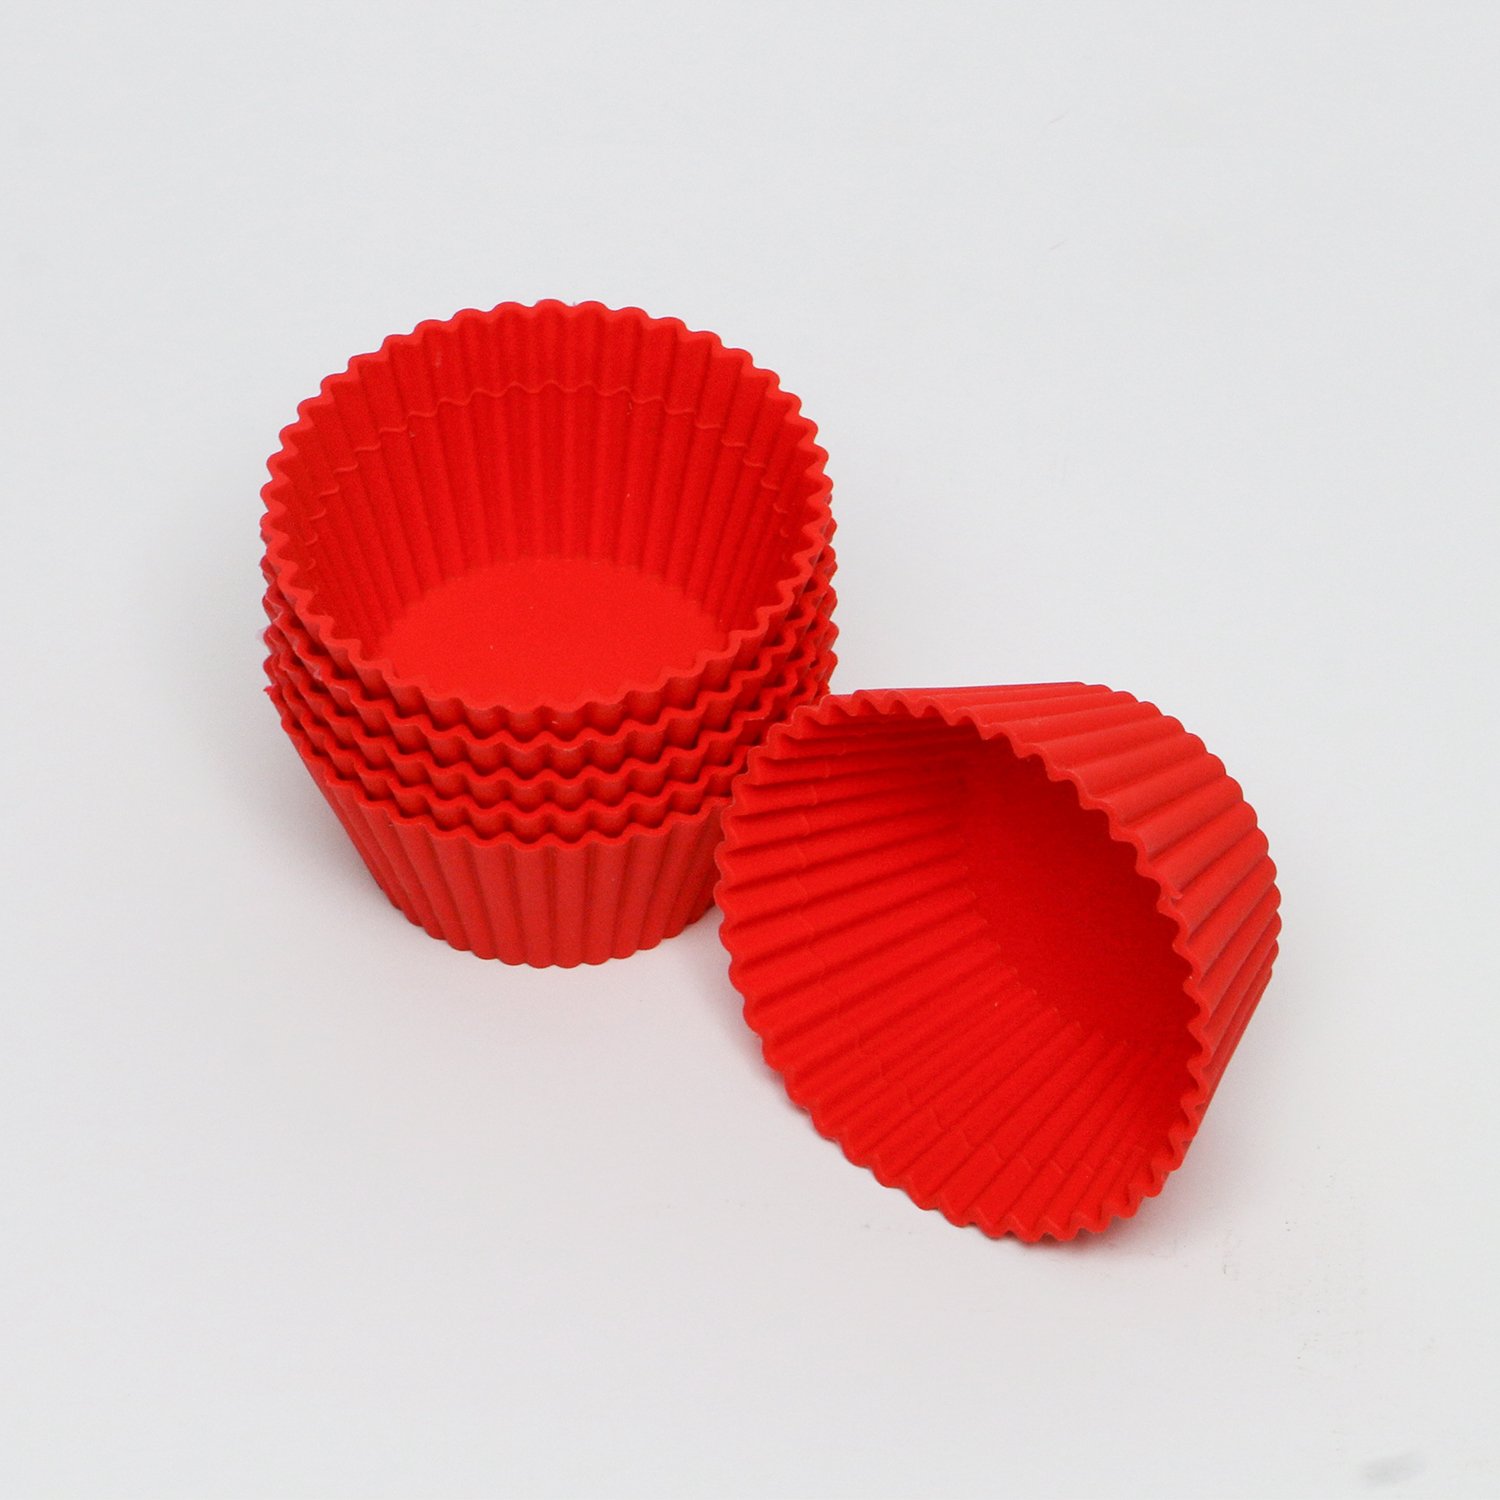 quality 100pcs Natural ceylon Silicone Cupcake Liners/ Baking Cups-Random Color 